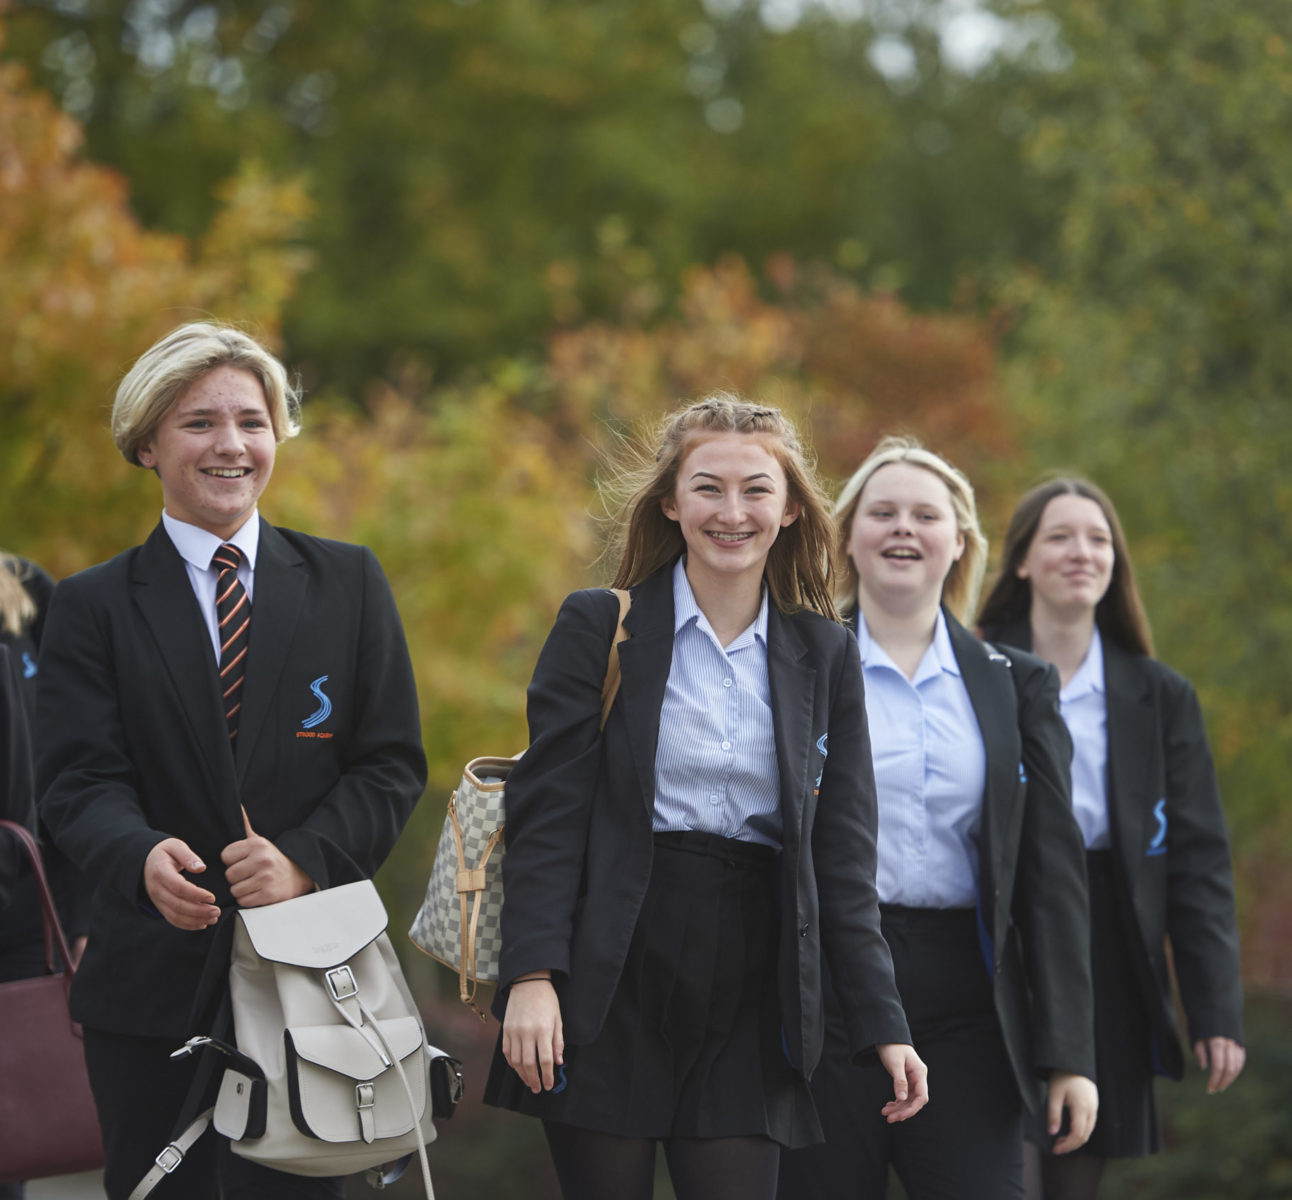 Four Strood Academy students pose outside for the camera, wearing their school bags on their backs.